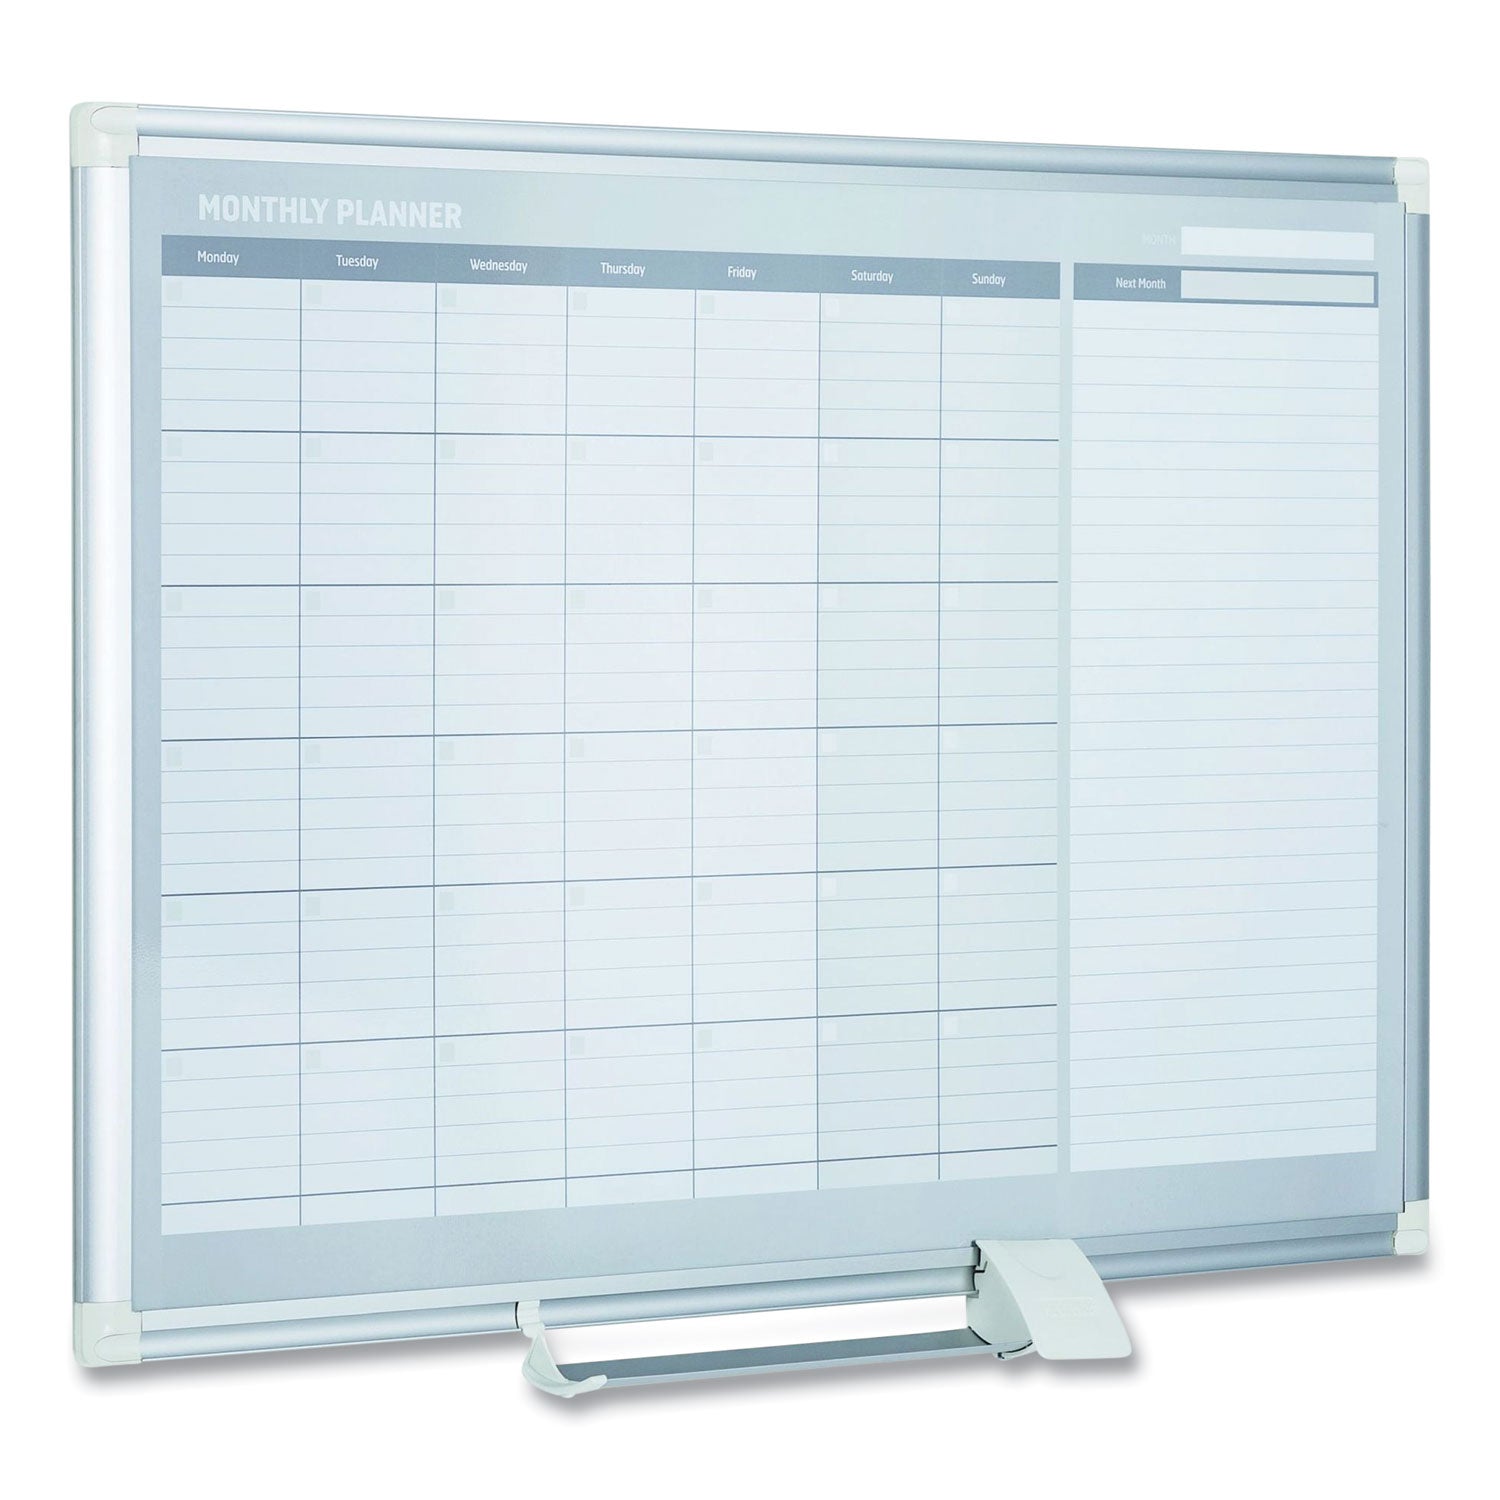 Magnetic Dry Erase Calendar Board, One Month, 48 x 36, White Surface, Silver Aluminum Frame - 